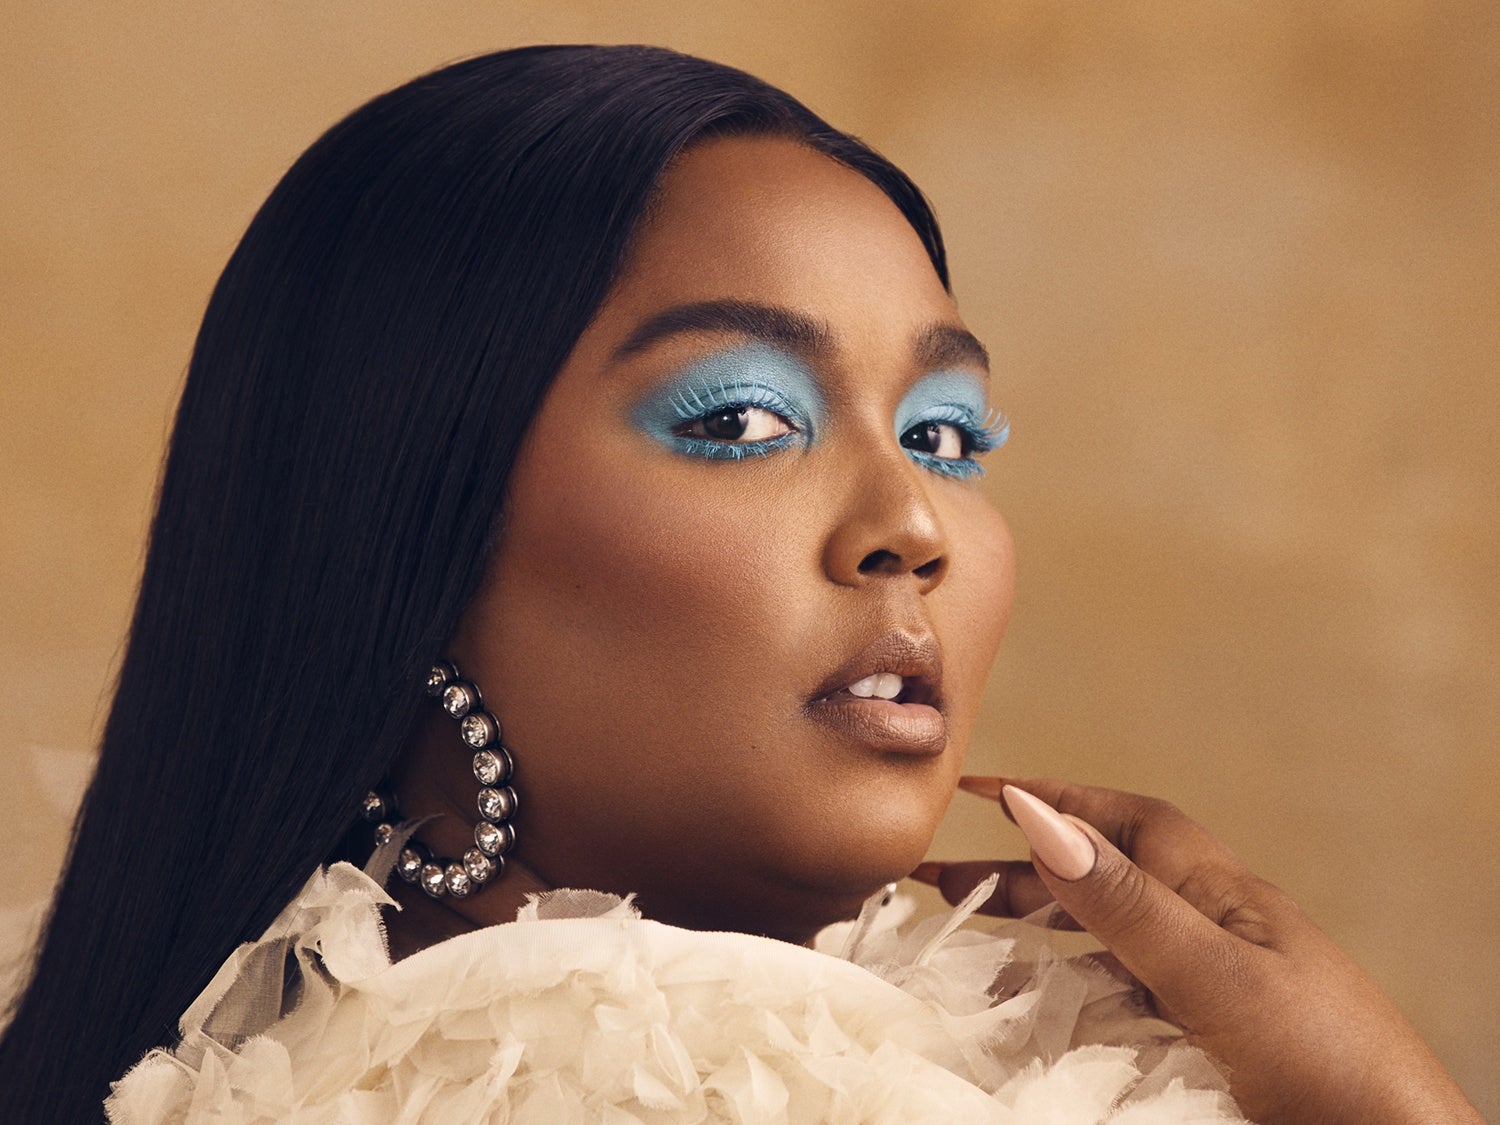 'We Rise:' Even Amid Heavy Criticism, Lizzo Maintains Message Of Positivity, Self-Love And Acceptance